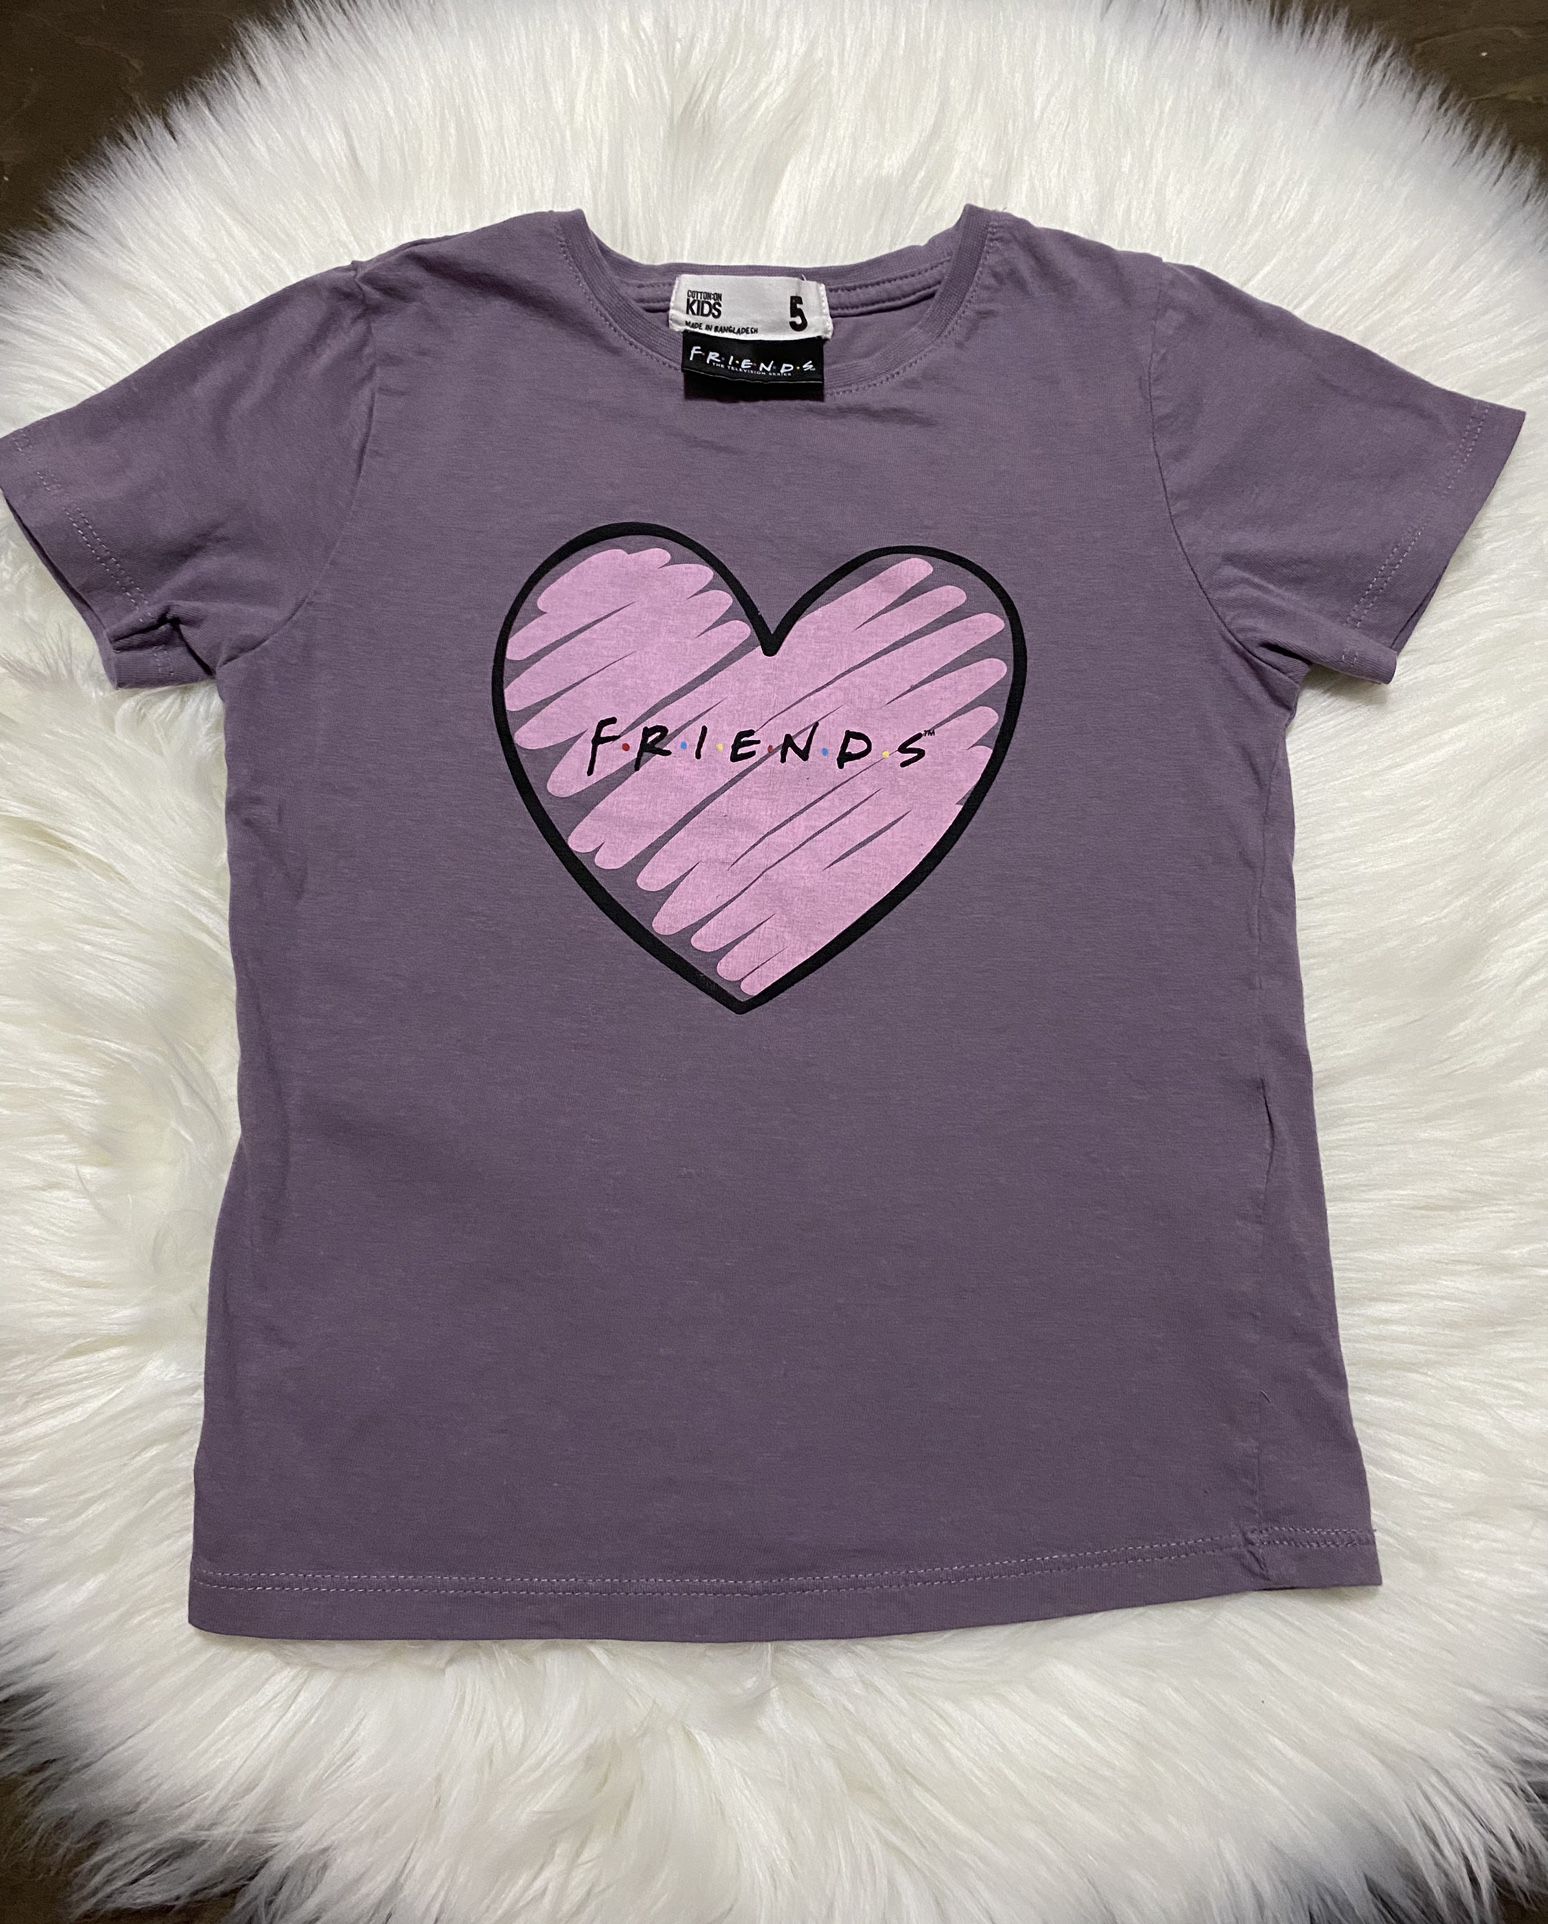 Friends T-Shirt For Toddler Girl Size 5T